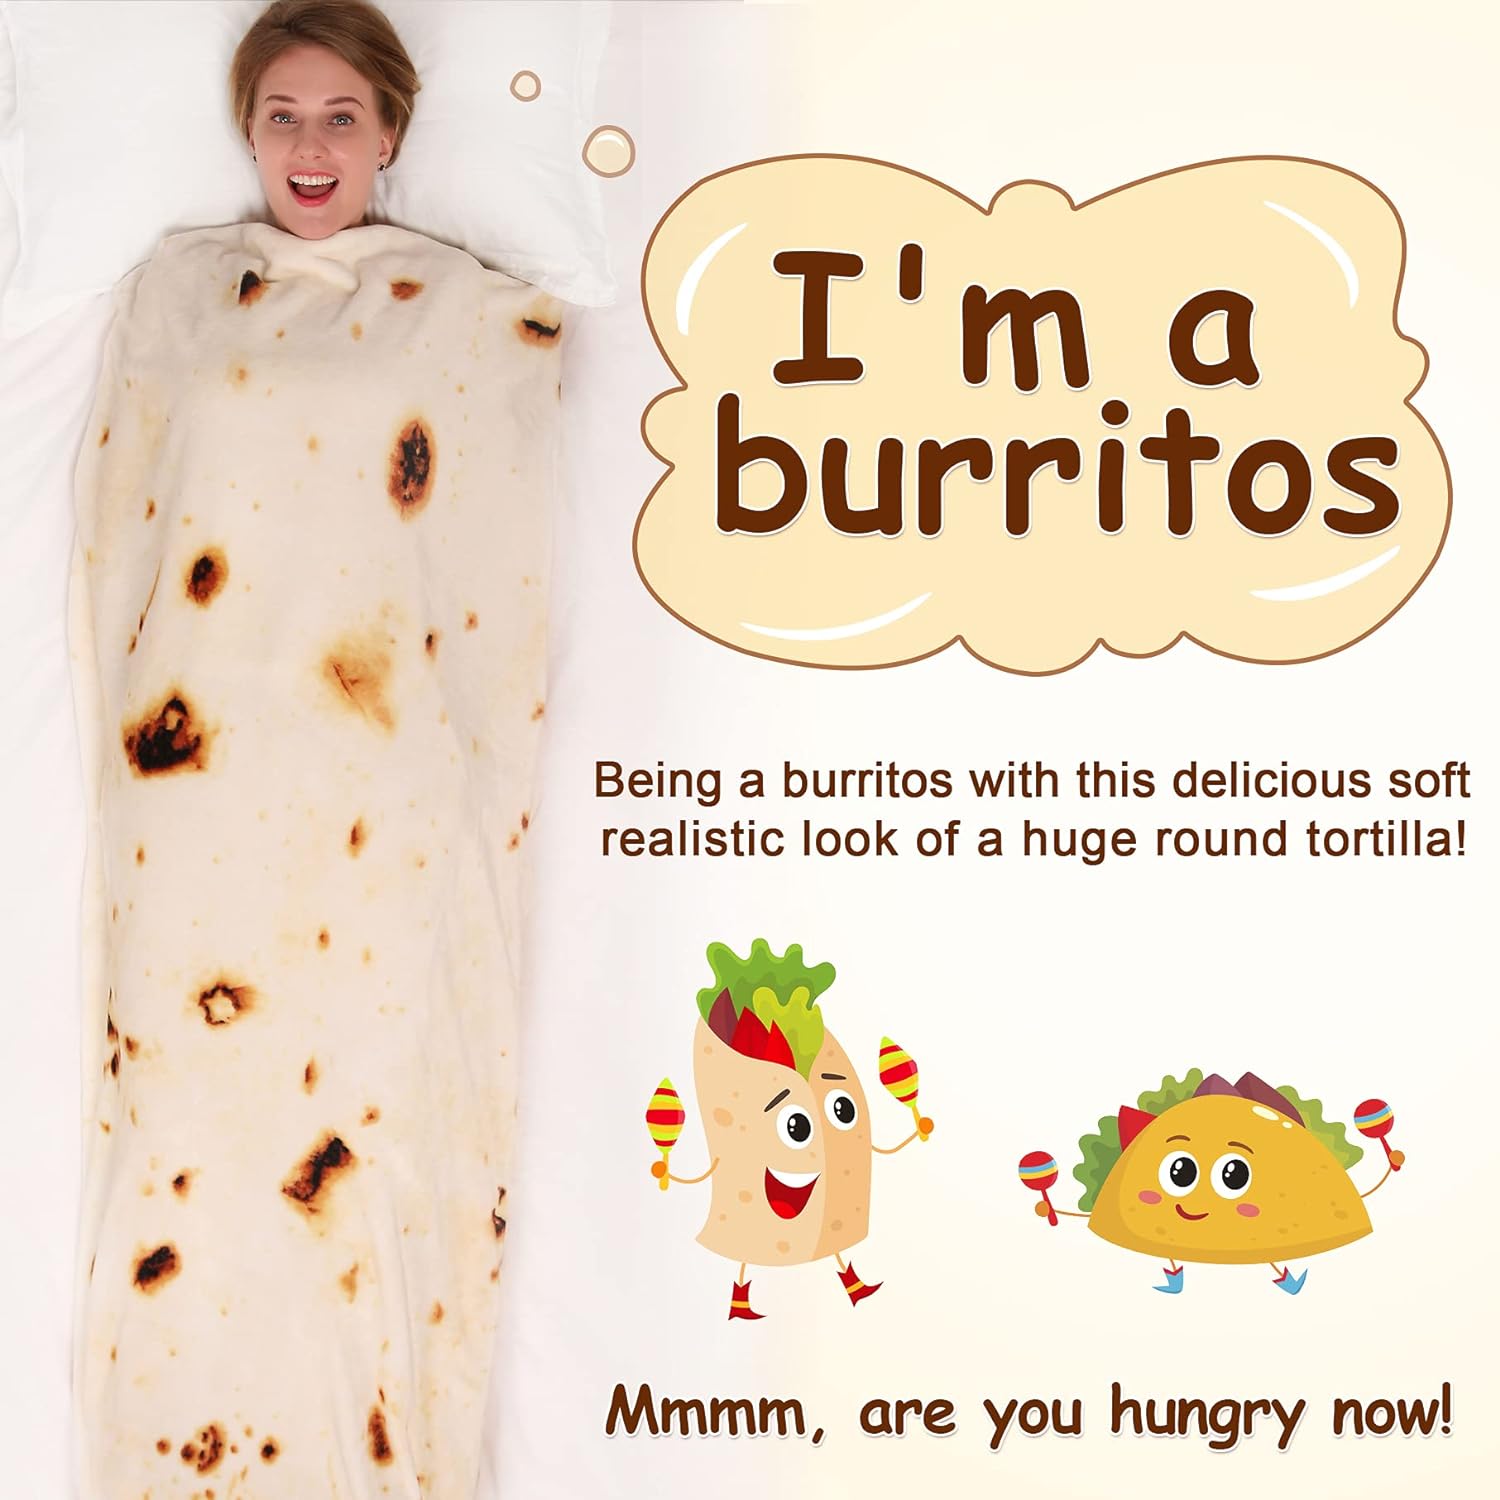 mermaker Burritos Tortilla Throw Blanket 2.0 Double Sided 71 inches for Adult and Kids, Giant Funny Realistic Food Blankets, 285 GSM Novelty Soft Flannel Taco Blanket (Yellow -Double Sided)